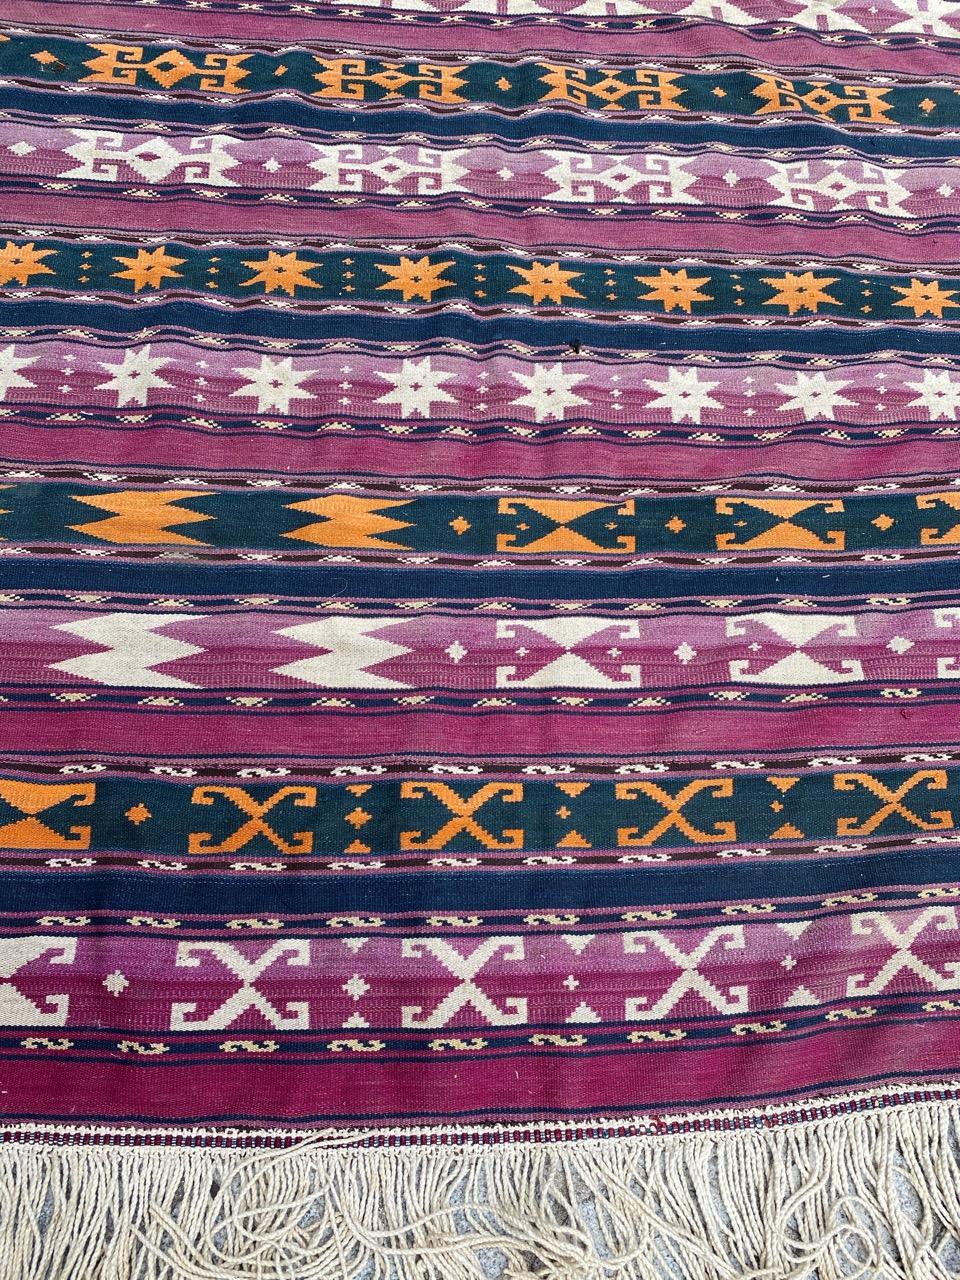 Beautiful early 20th century tribal Kilim with geometrical design and nice colors, entirely hand woven with wool on wool foundation.

✨✨✨
